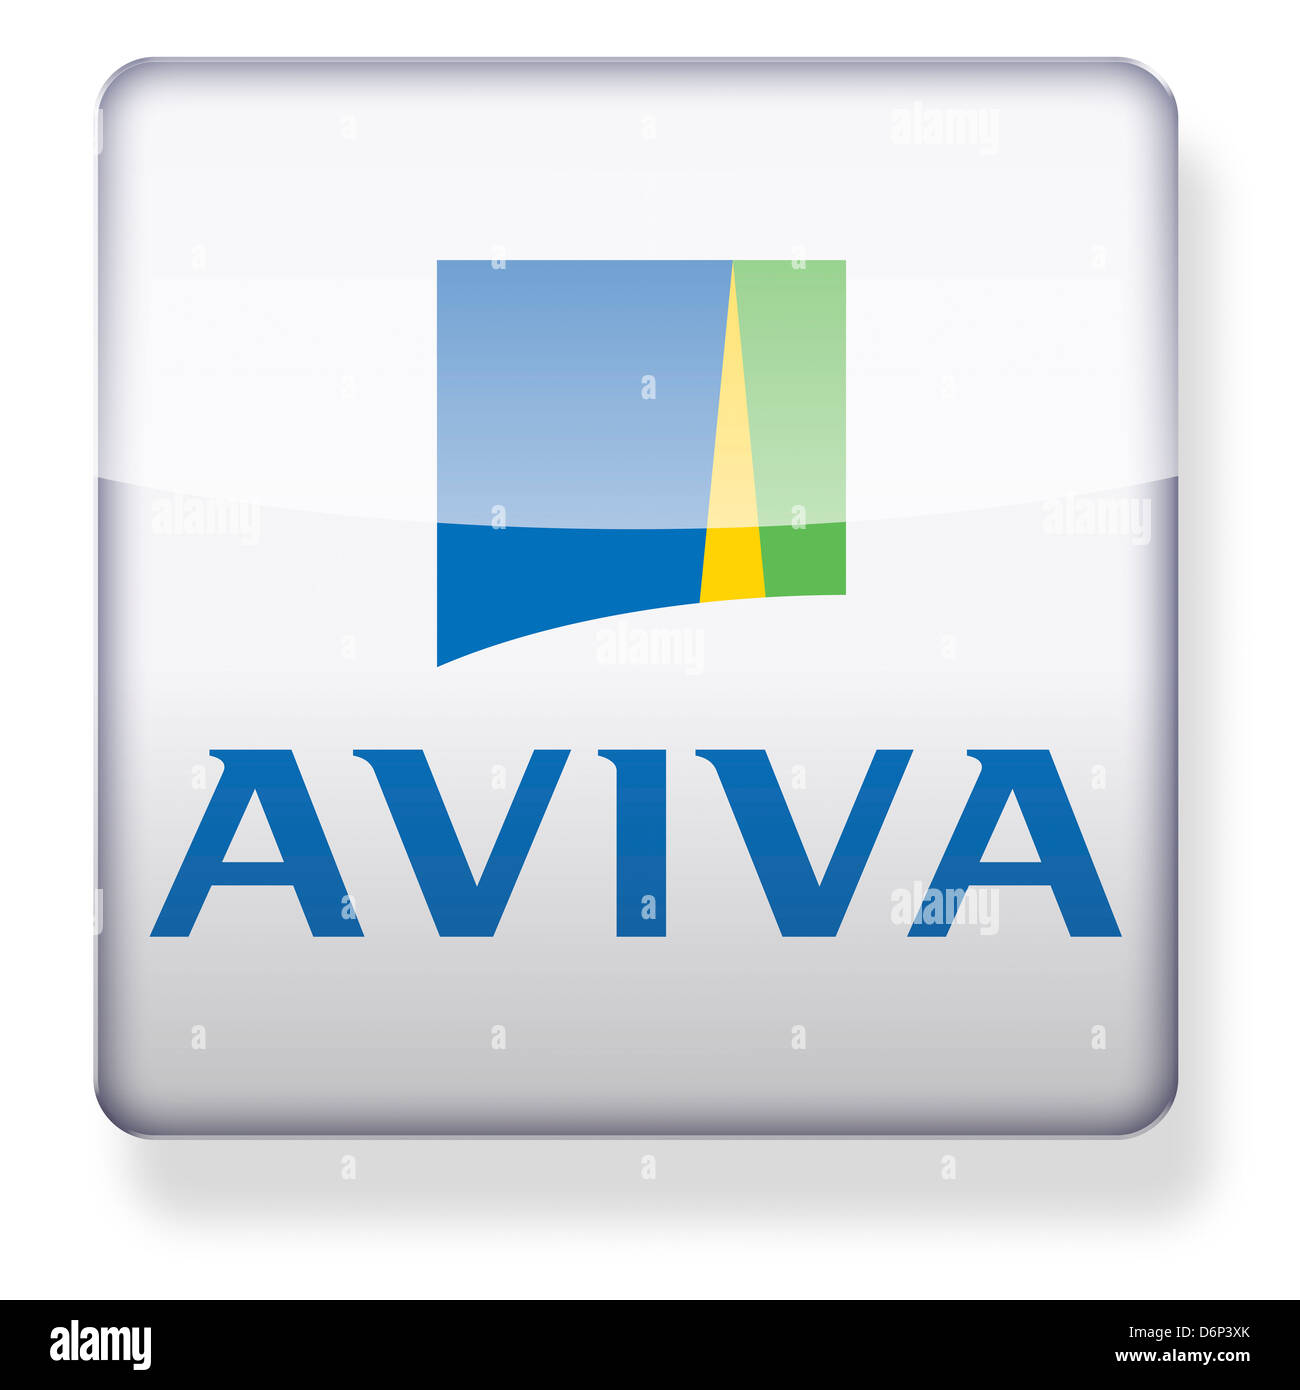 Aviva Insurance logo as an app icon. Clipping path included. Stock Photo